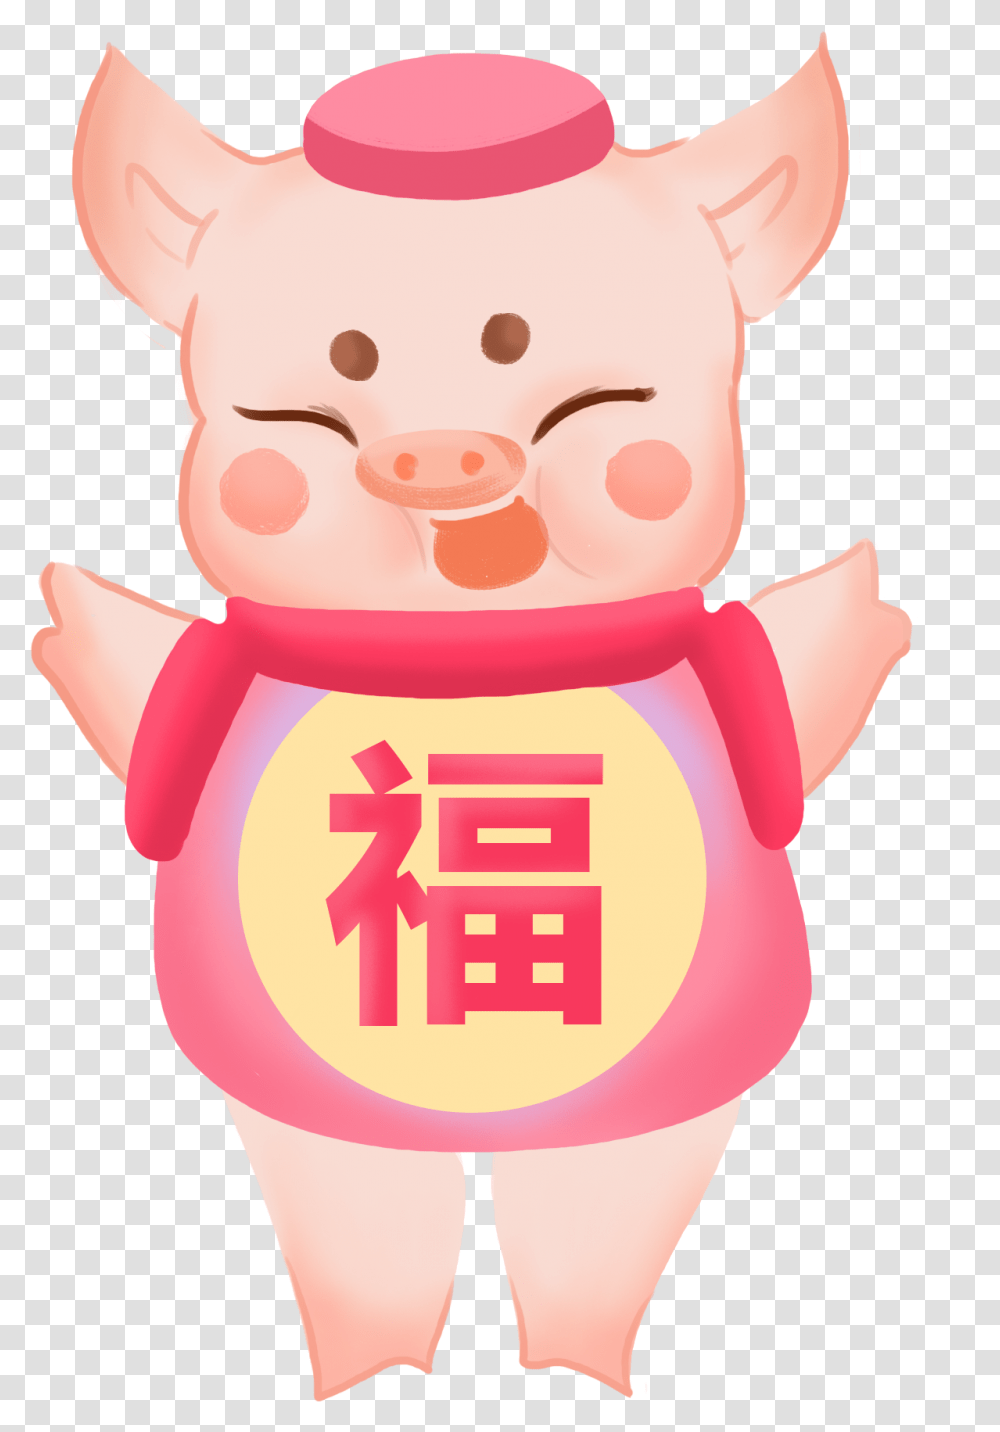 Pig Year Baby 2019 And Psd Cartoon, Snowman, Winter, Outdoors, Nature Transparent Png